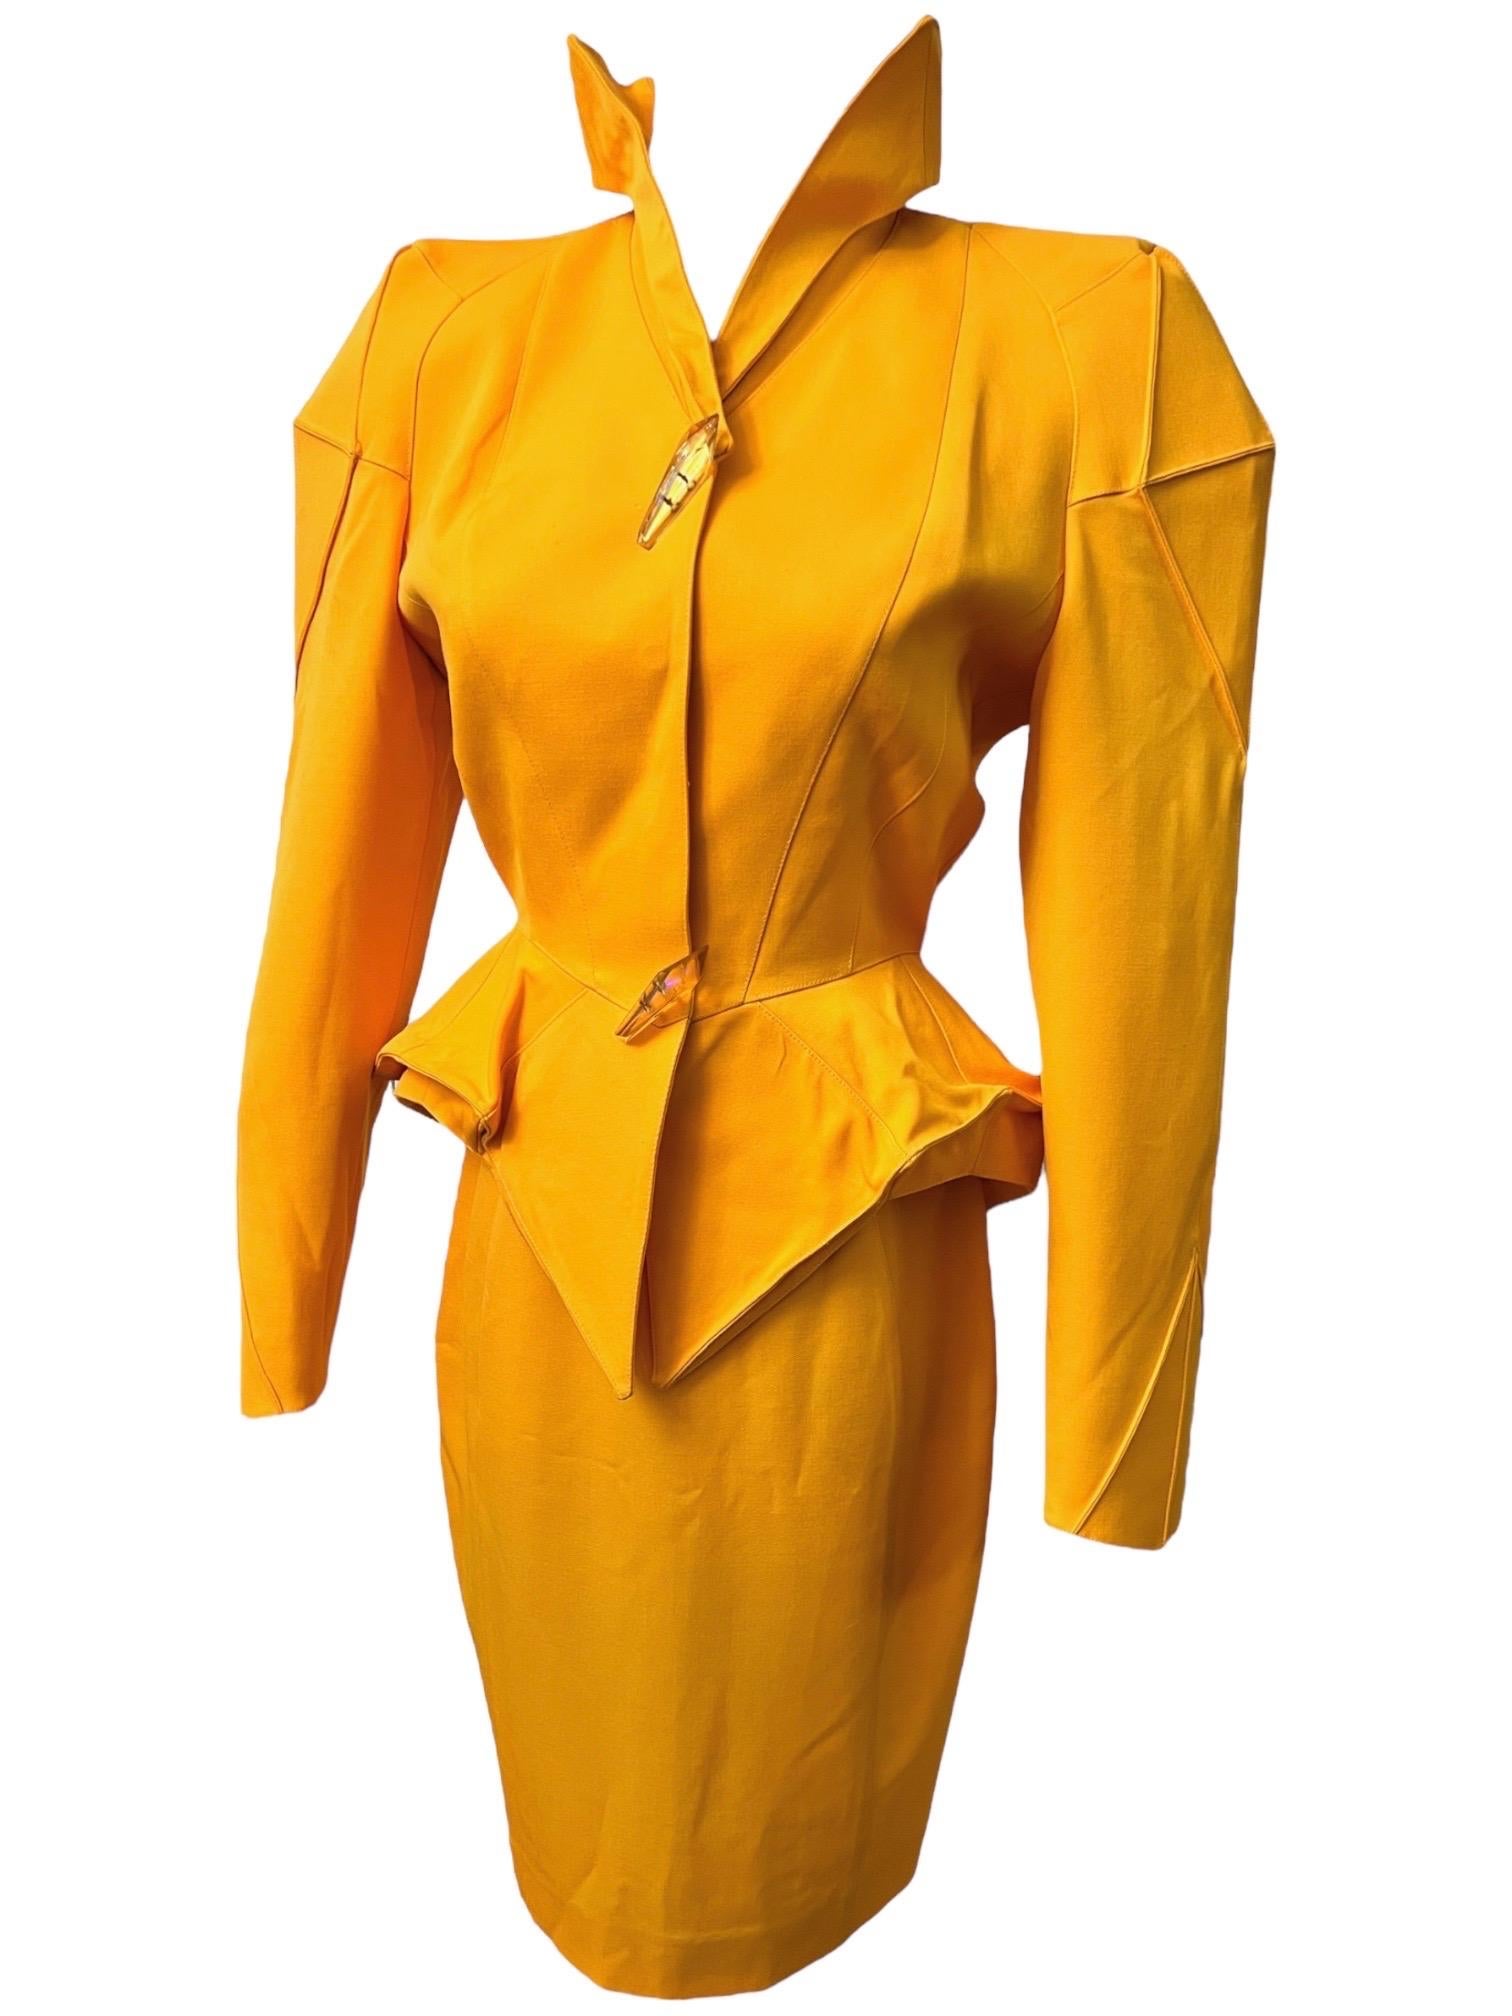 F/W 1991 Thierry Mugler Yellow Sculptural Skirt Suit In Good Condition For Sale In Concord, NC